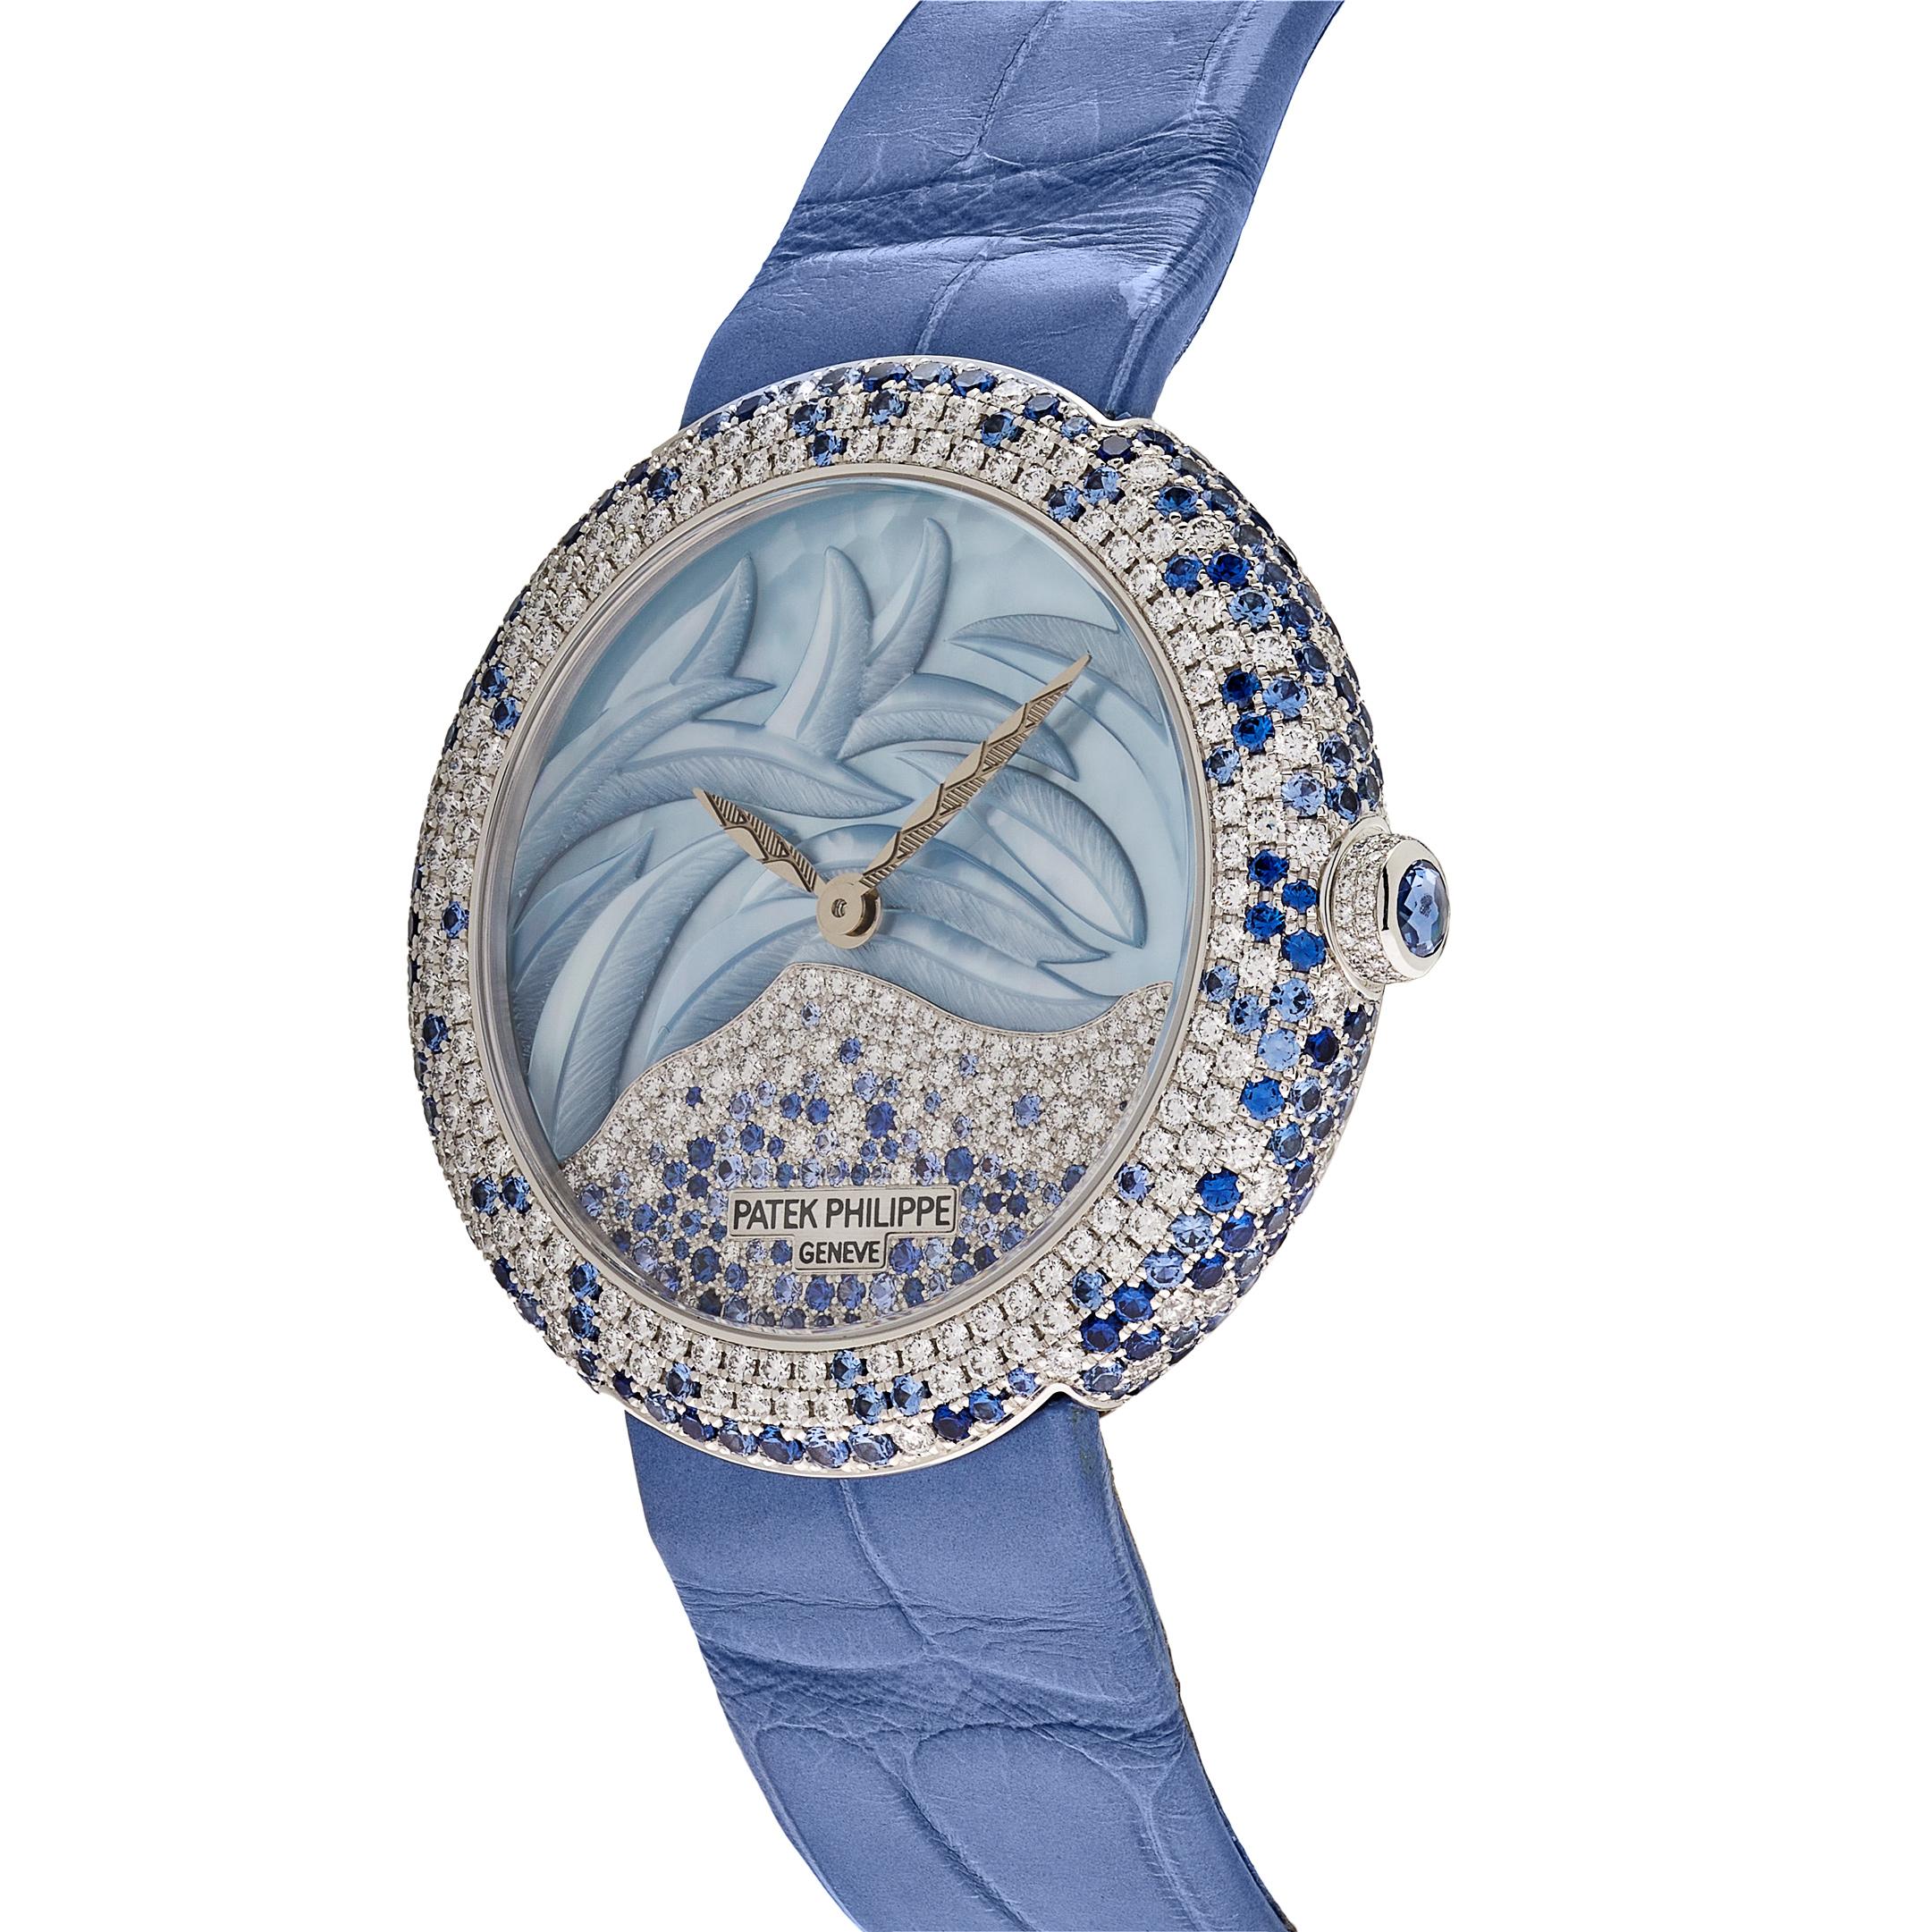 The Patek Philippe Calatrava watch features a 38.5mm white gold case on a blue alligator leather bracelet with a gem-set prong buckle. On the lower part of the dial, diamonds mingle with blue sapphires in a “random” or “snow” setting, while the